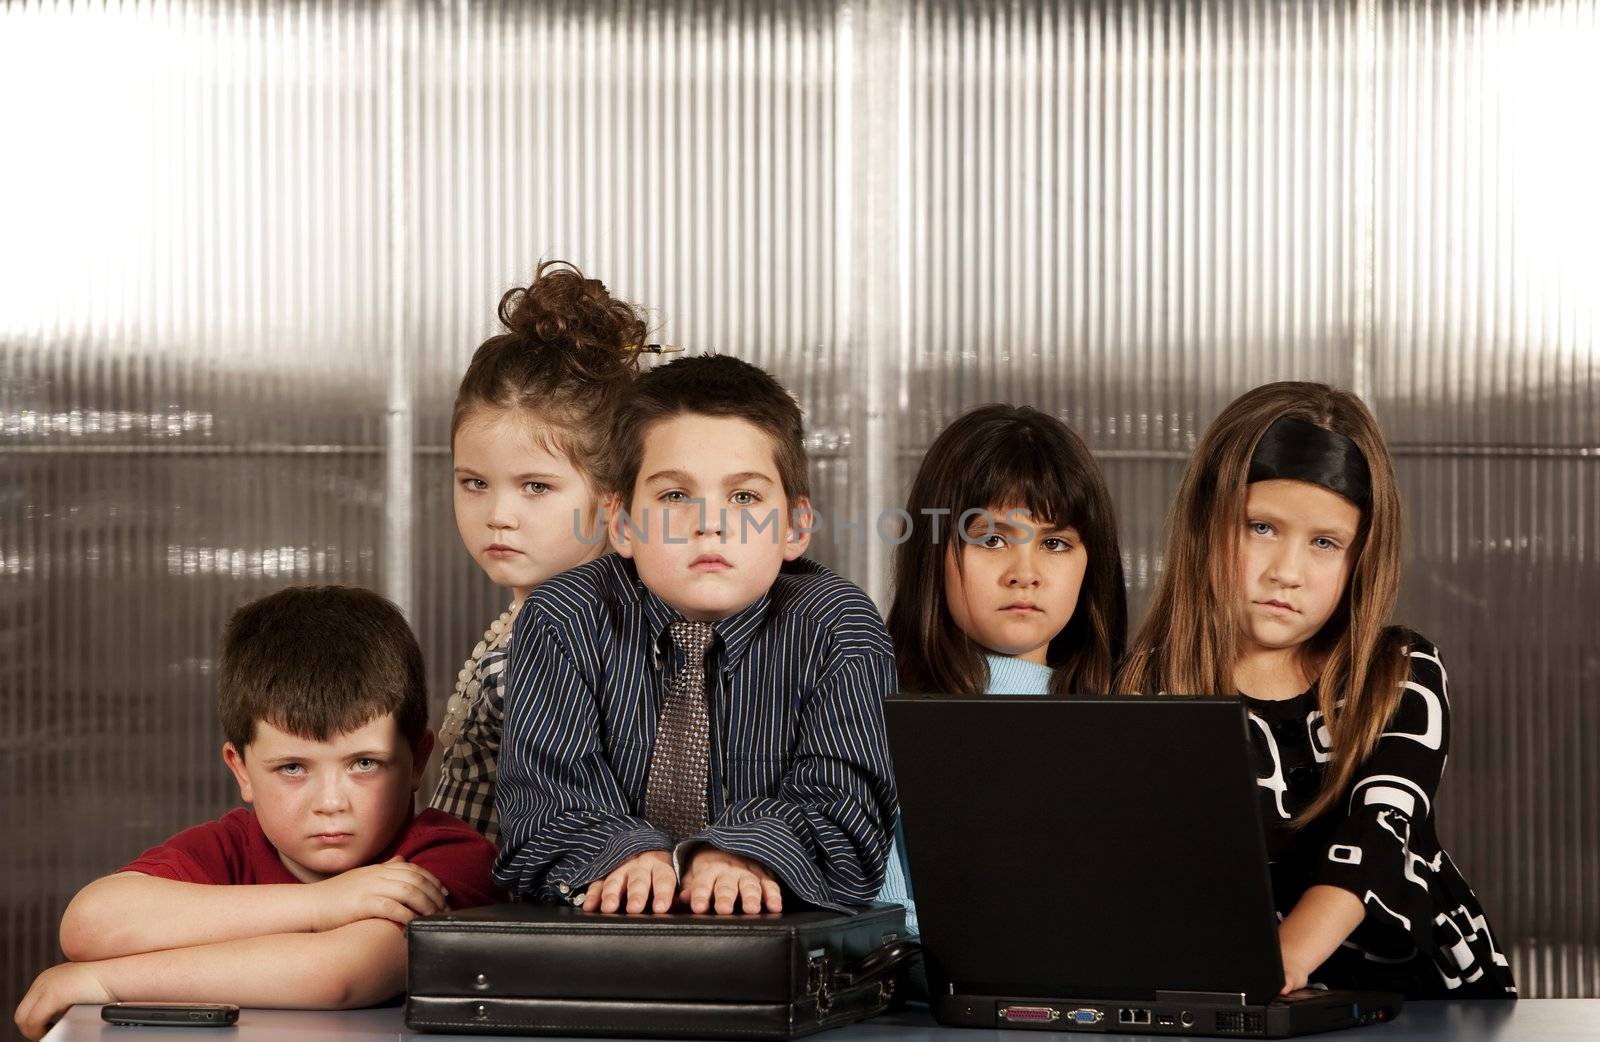 Kids posing as a professional business team